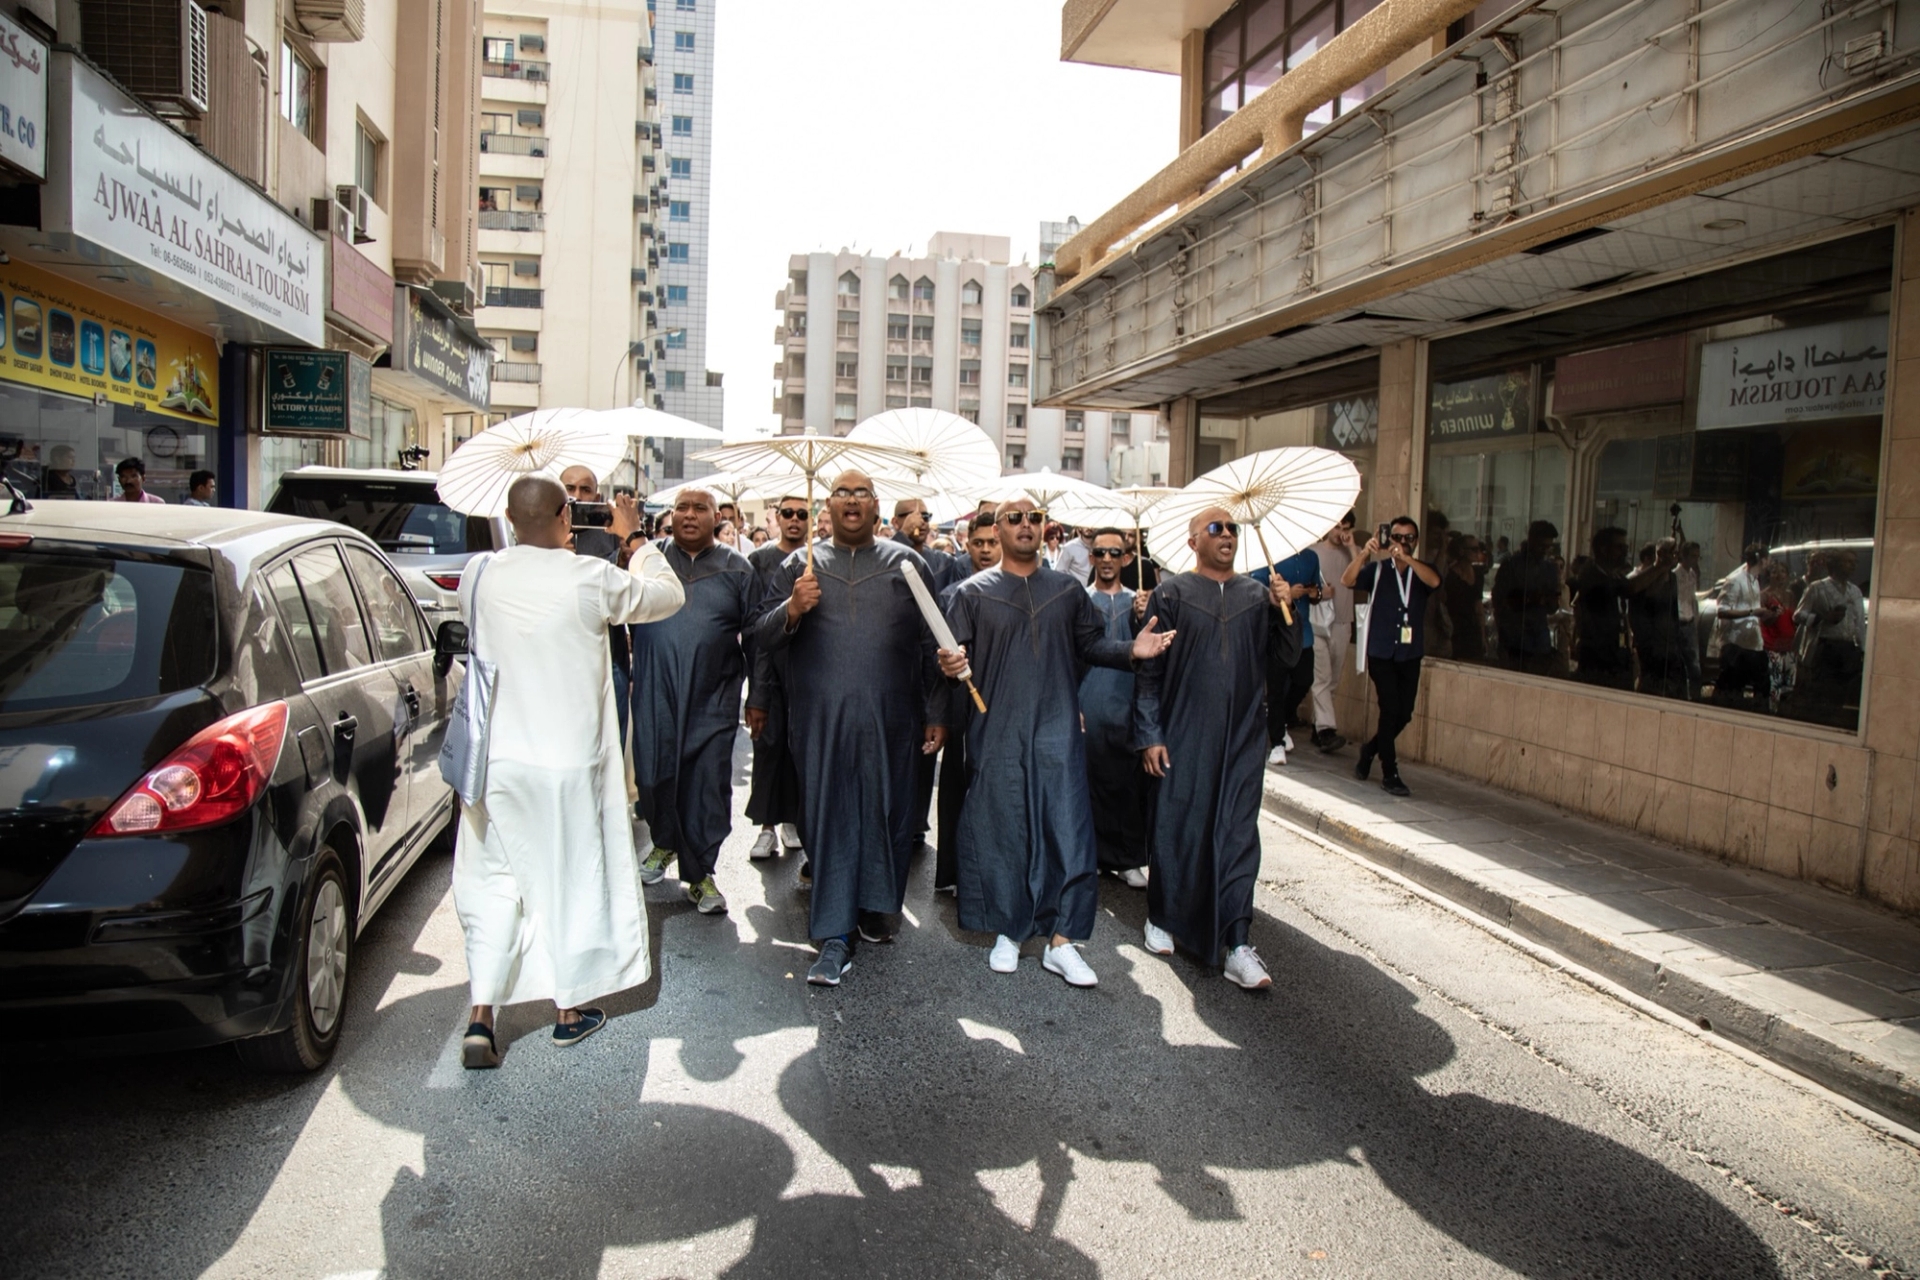 Procession as part of Silences and Spectres of the Indian Ocean, Nidhi Mahajan’s commission for ‘Rights of Future Generations’, inaugural edition of the Sharjah Architecture Triennial. 2019. Photo: Talie Eigeland